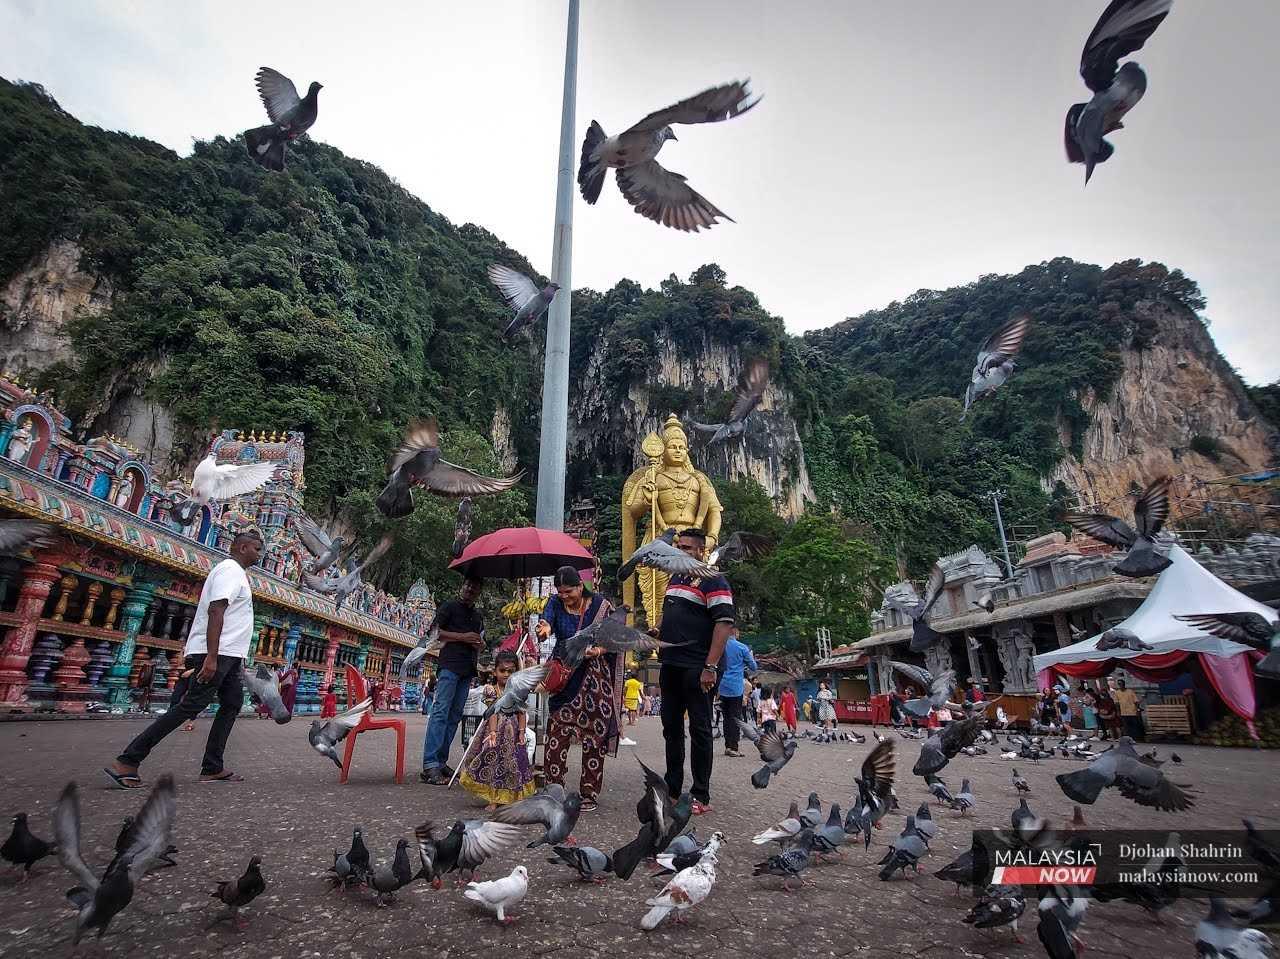 A family feeds the pigeons at the temple at Batu Caves ahead of Thaipusam, Feb 2. 